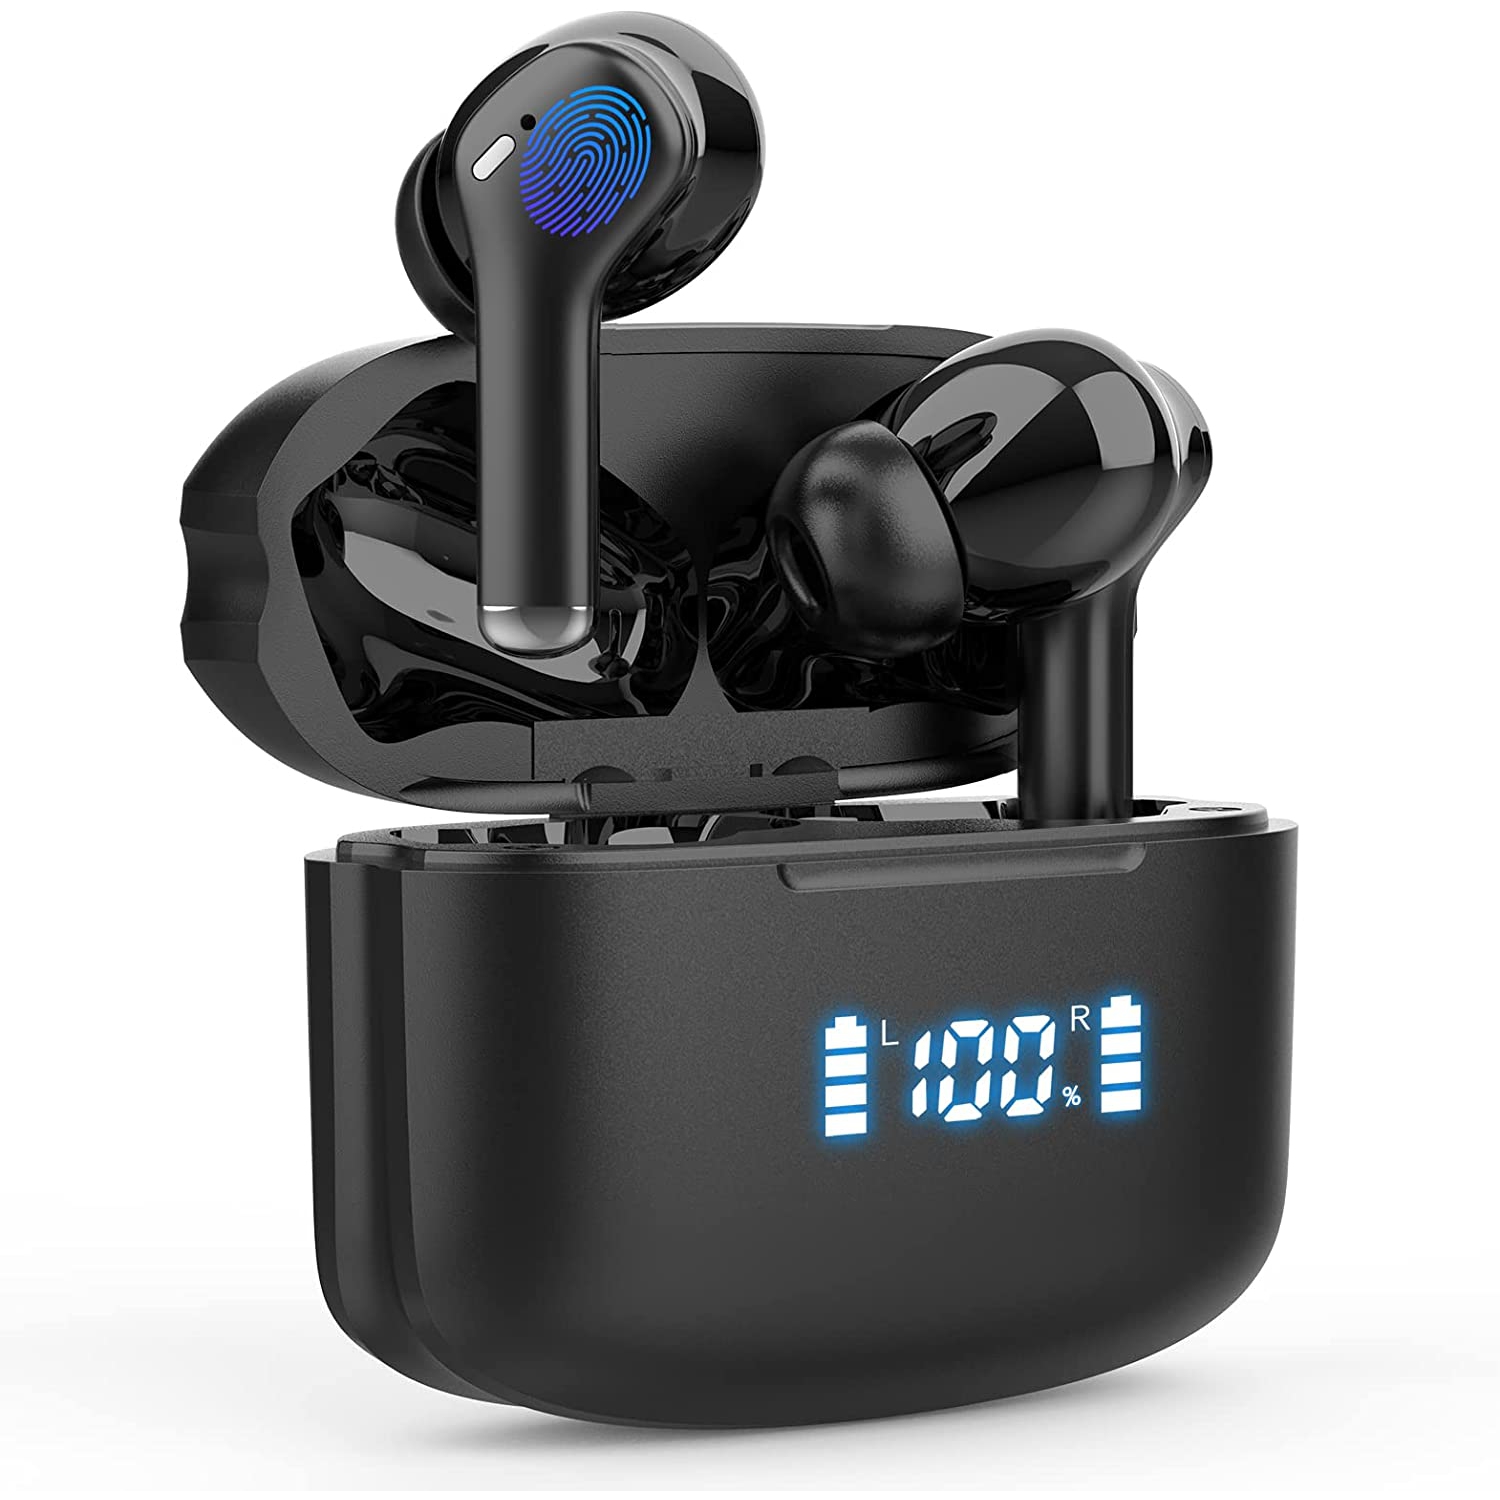 Dolaer Wireless Earbuds, Bluetooth 5.1 Headphones in-Ear True Wireless Stereo Long Playtime Bluetooth Earbuds Built-in 4 Mics Waterproof Smart Touch Control Enhanced Bass LED Displ